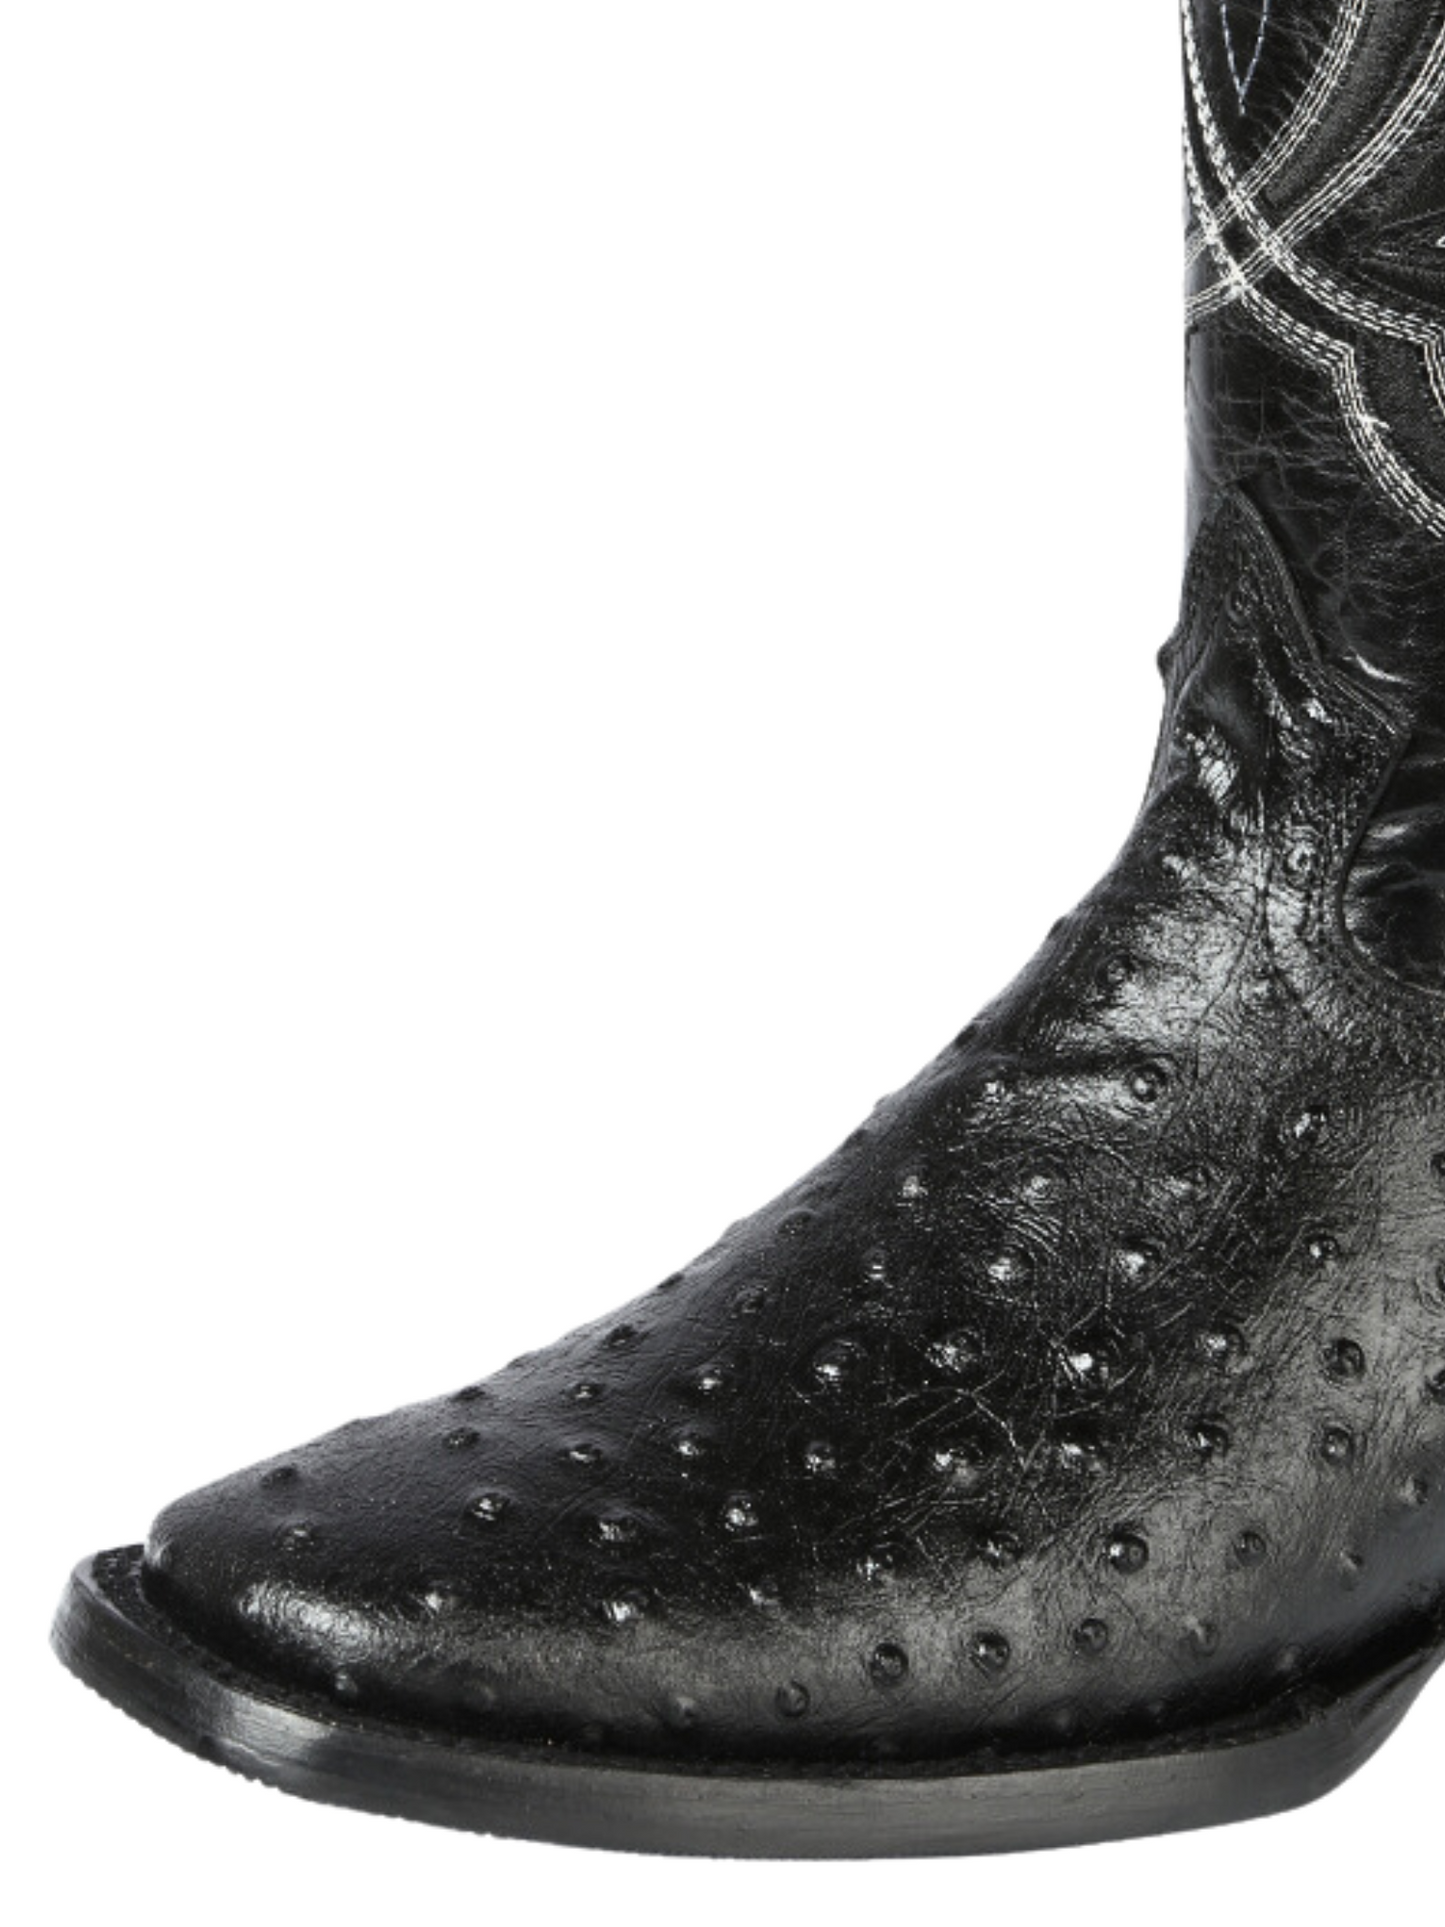 Rodeo Cowboy Boots Imitation Ostrich Engraved in Cowhide Leather for Men 'El General' - ID: 44673 Cowboy Boots El General